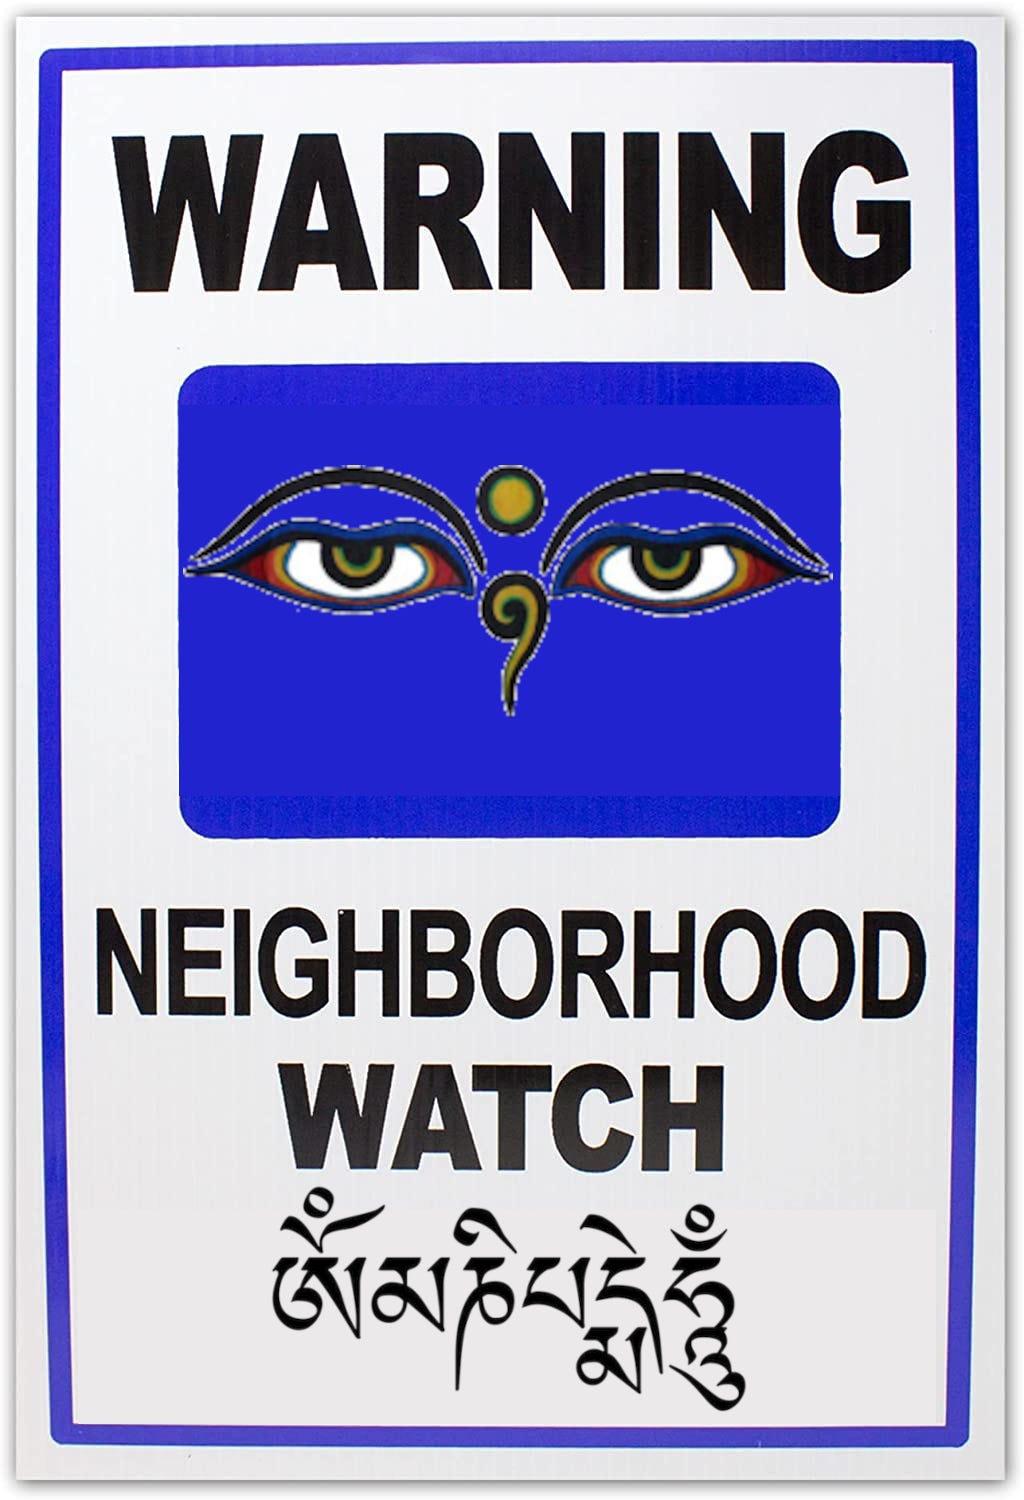 Neighborhood Watch sign featuring eyes from stupa common in Nepal. The Mantra below is Om Mani Padme Hum associated with Lord Chenrezi / Avalokiteshvara ‘The Lord who Looks Down’ 